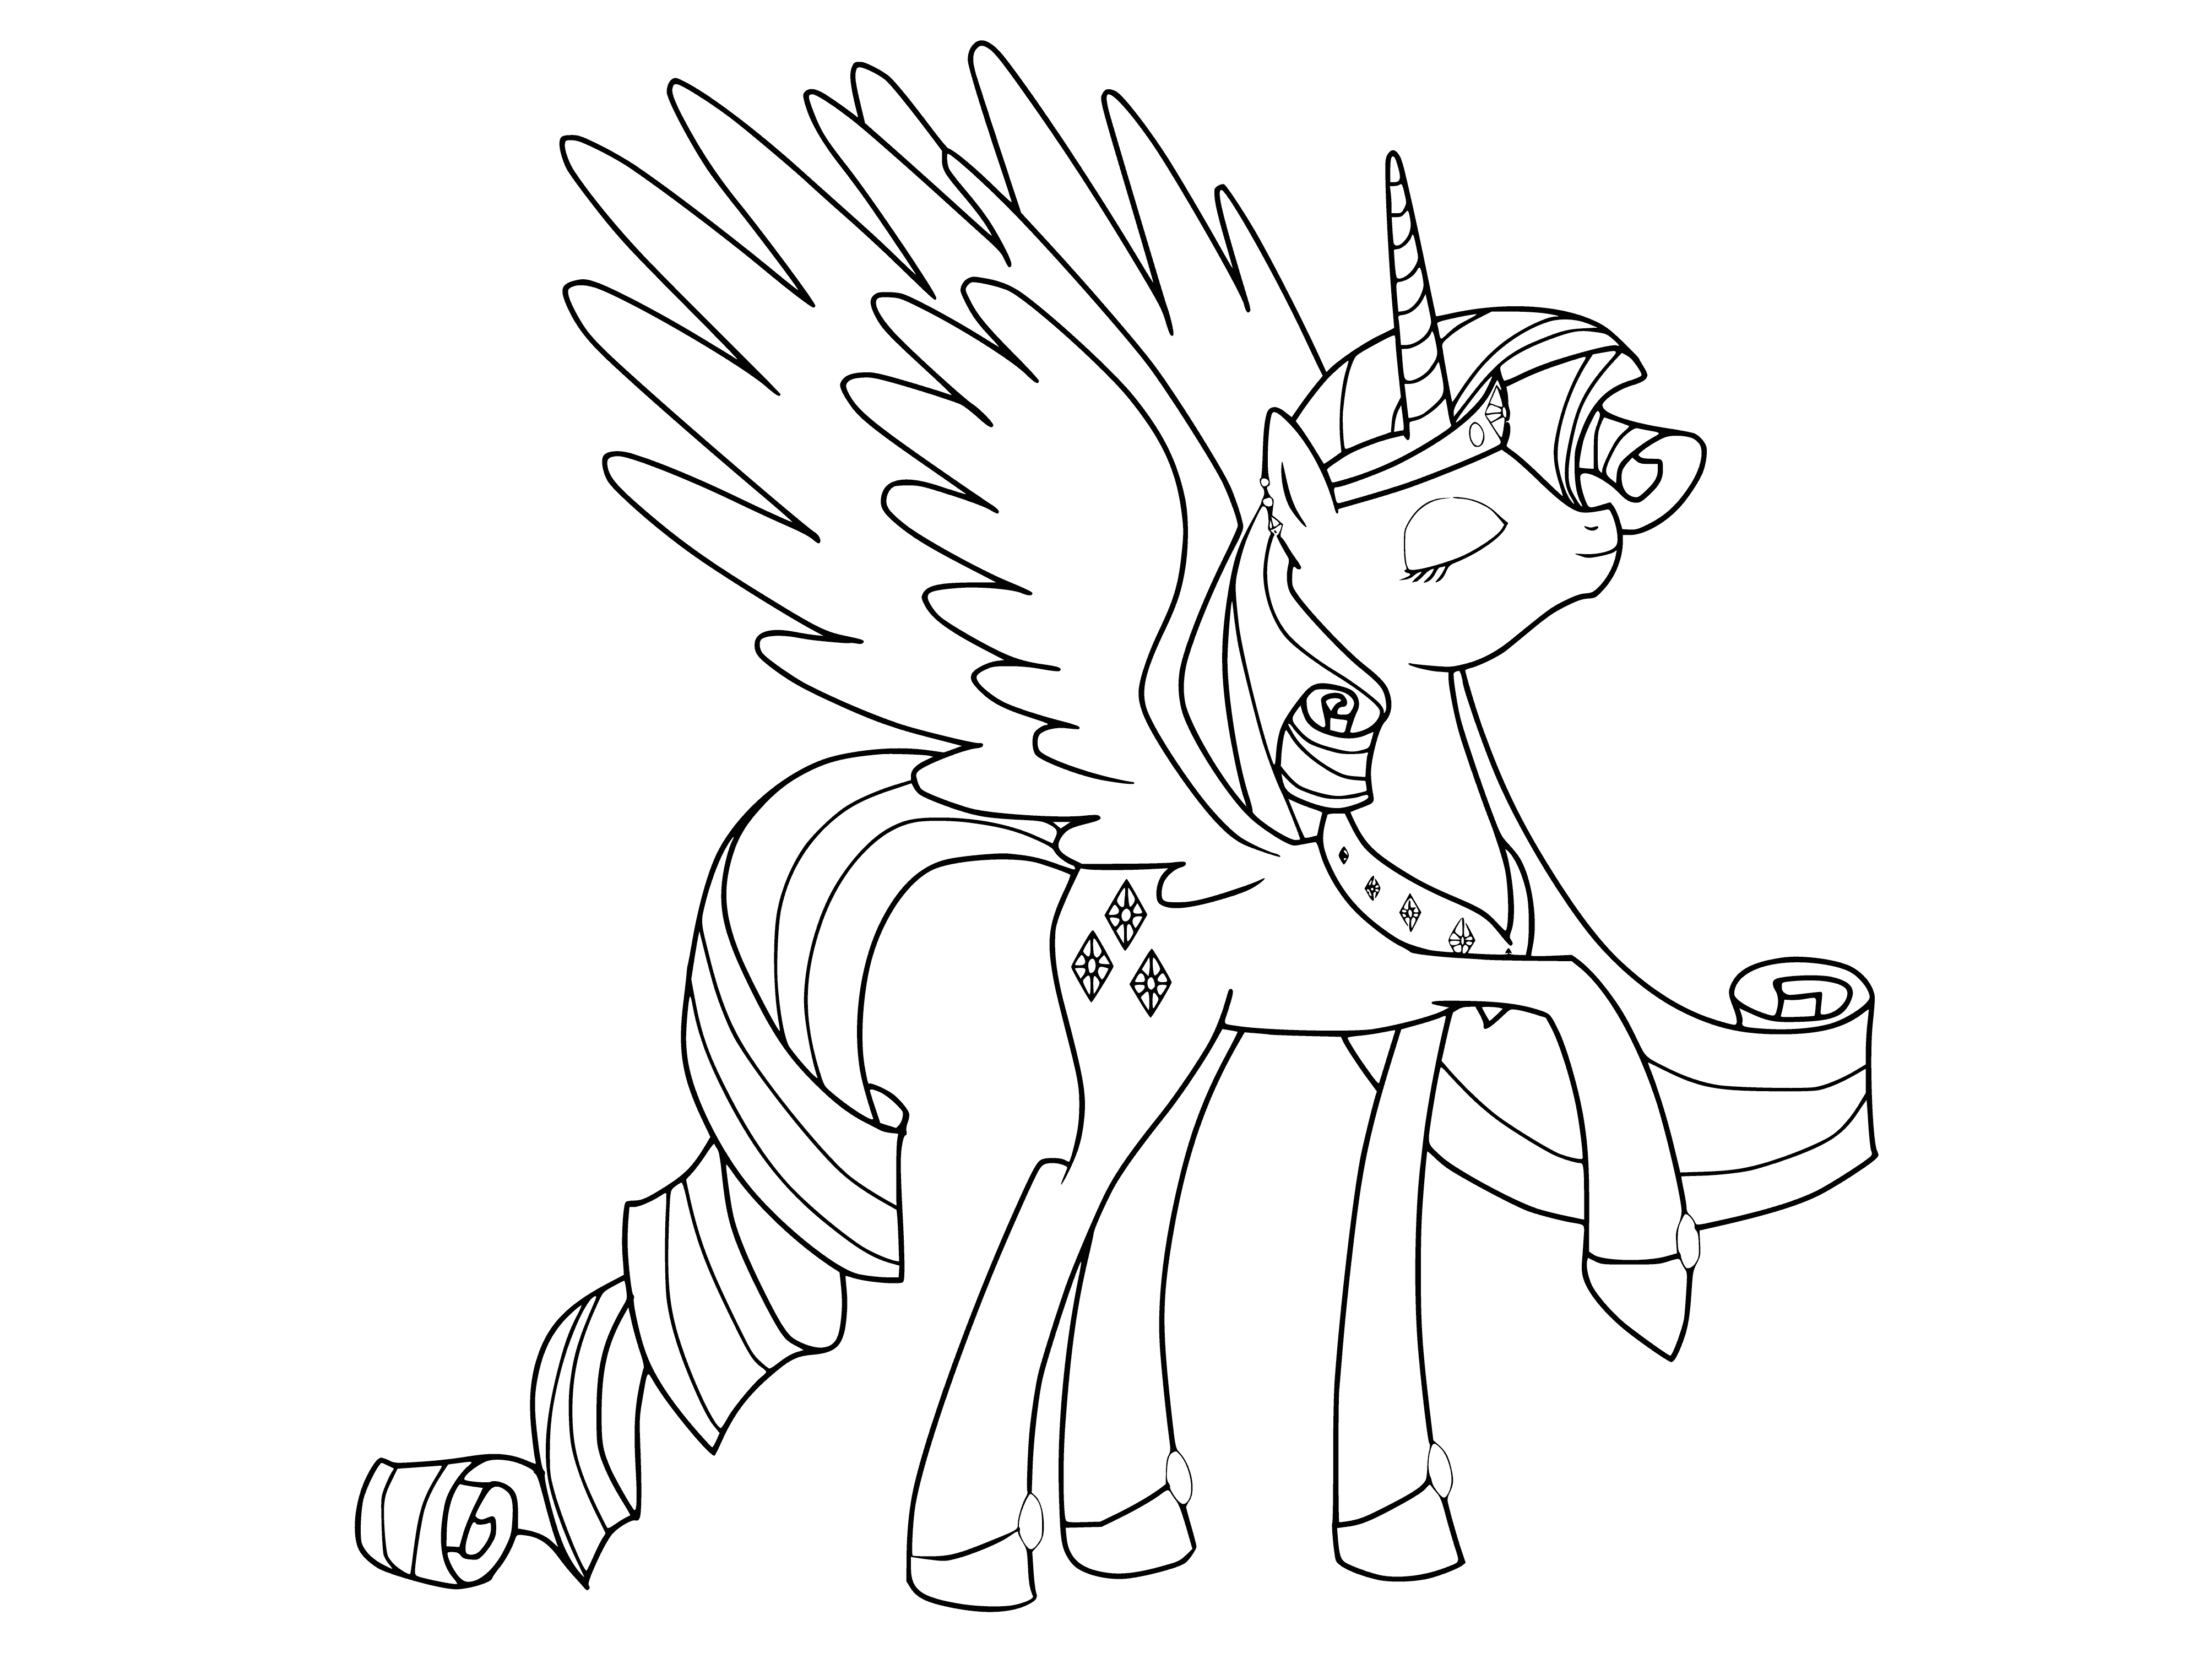 coloring page: Person with magenta hair in lavender gown and a jeweled necklace, arms raised and eyes closed, with wings extended.